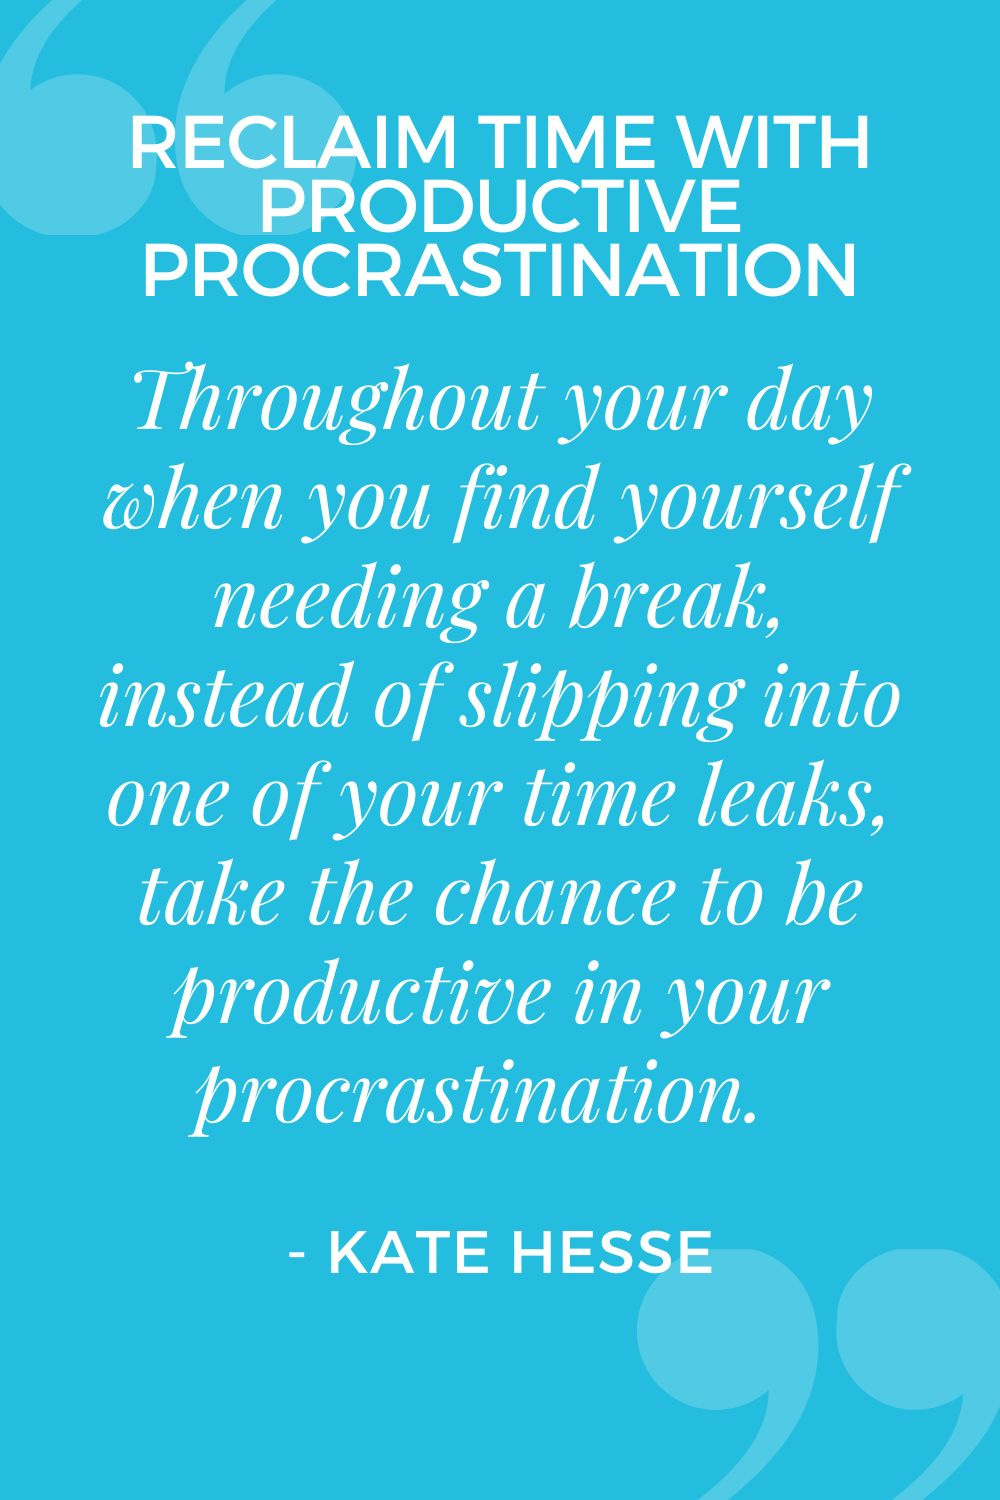 Throughout your day when you find yourself needing a break, instead of slipping into one of your time leaks, take the chance to be productive in your procrastination.